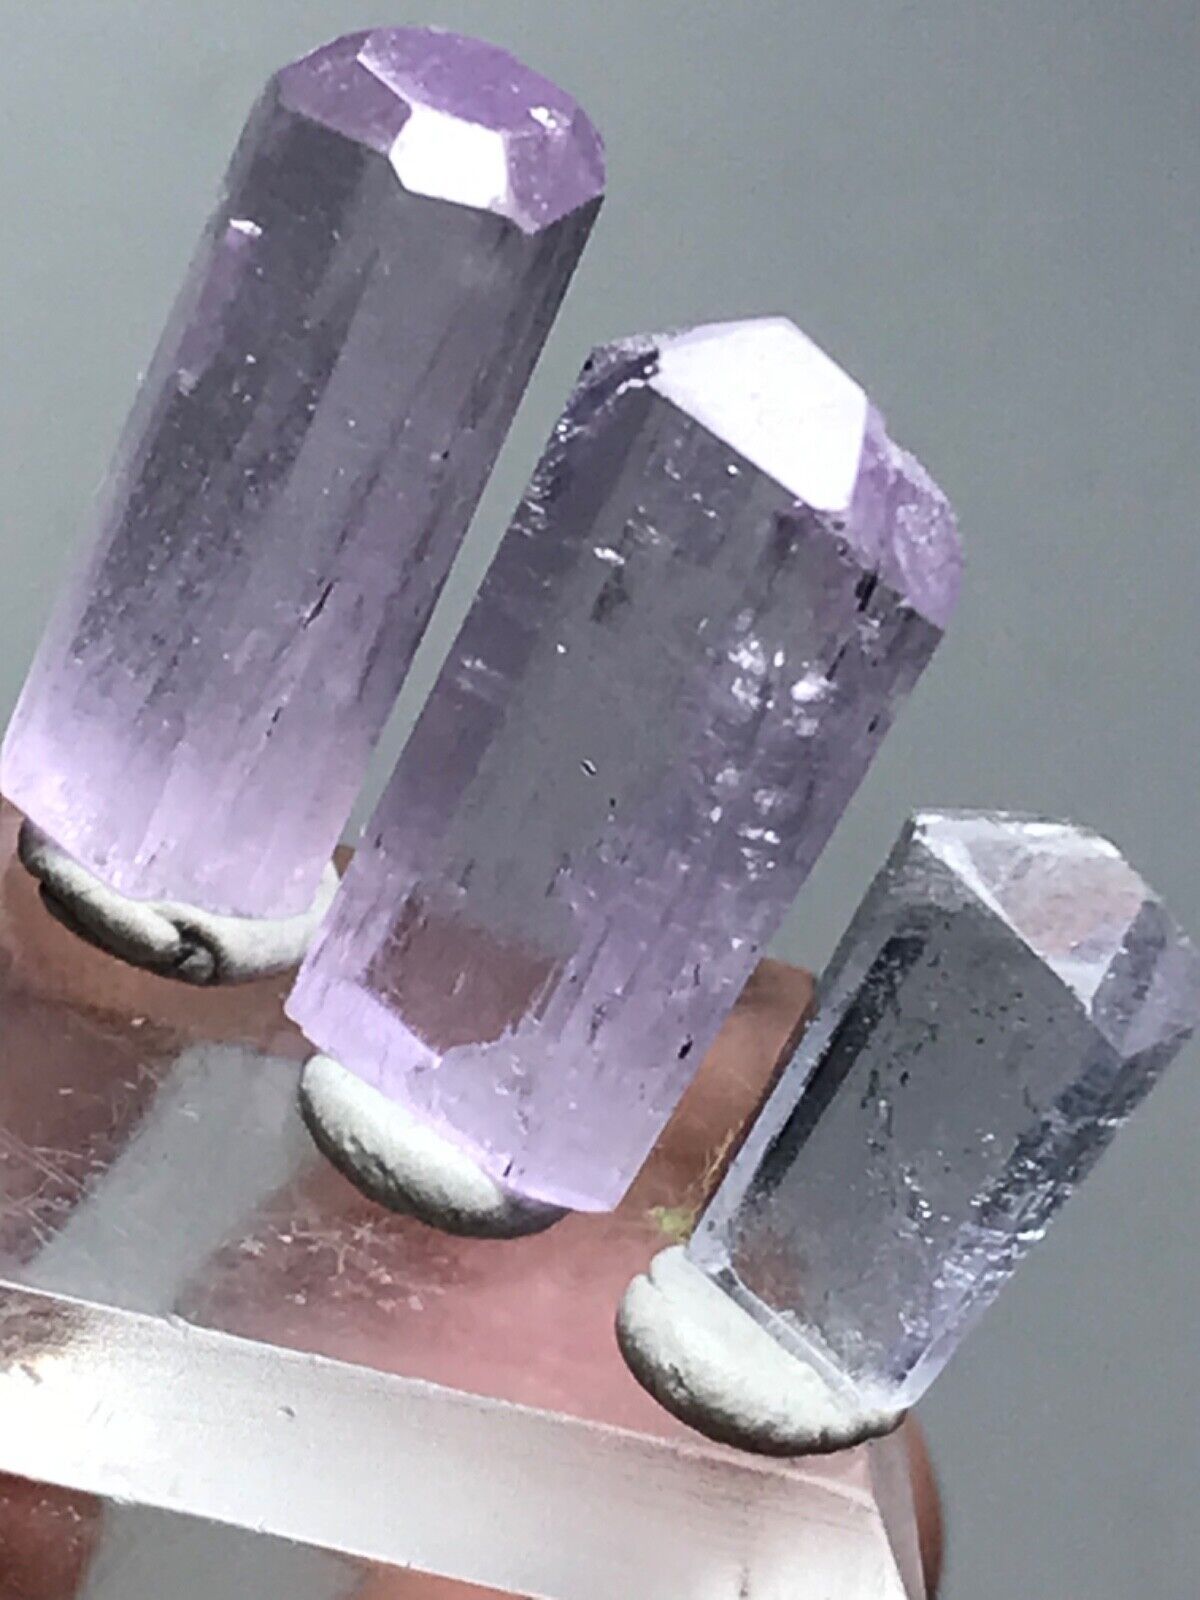 32.60 CTS AMAZING NATURAL POLISHED KUNZITE CRYSTALS LOT FROM AFGHANISTAN(aa26)